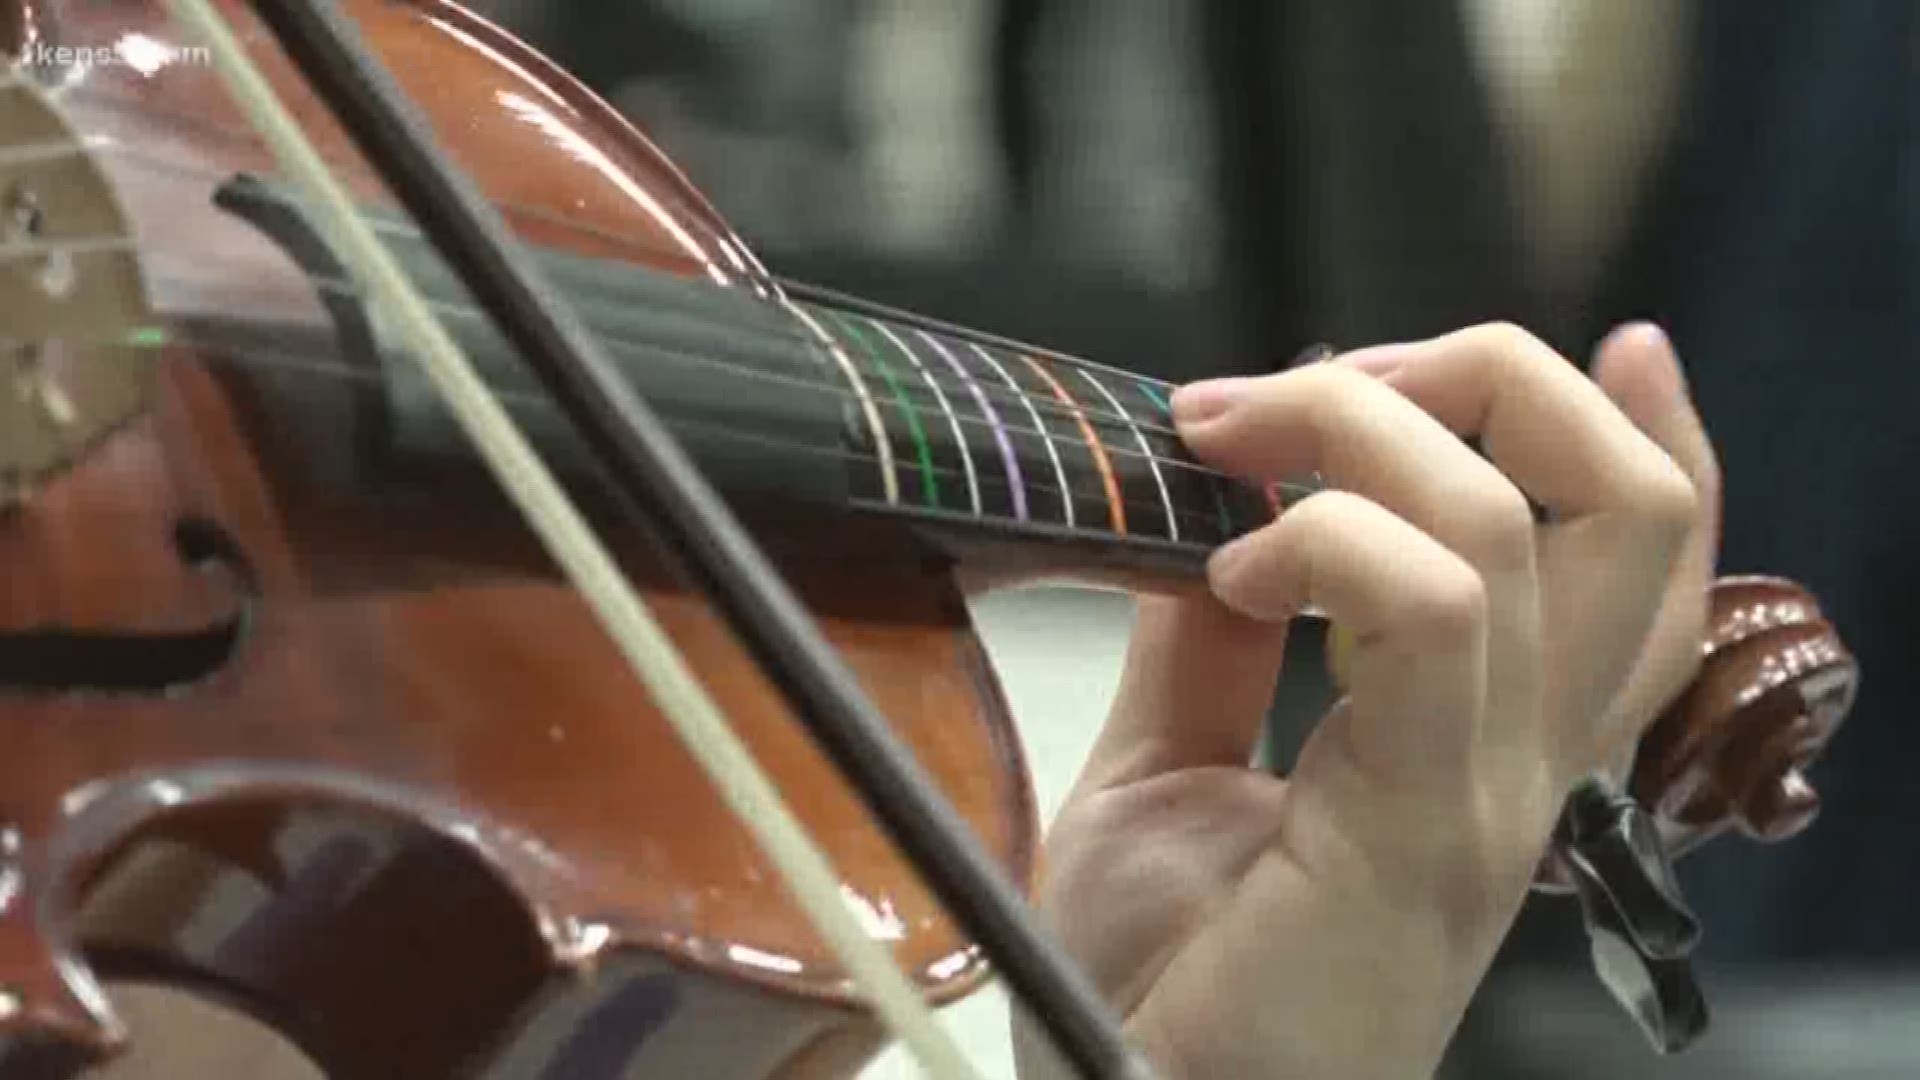 A San Marcos high school orchestra has struggled to stay alive. But the young musiciains are now thriving thanks to donated instruments and a welxoming environment.